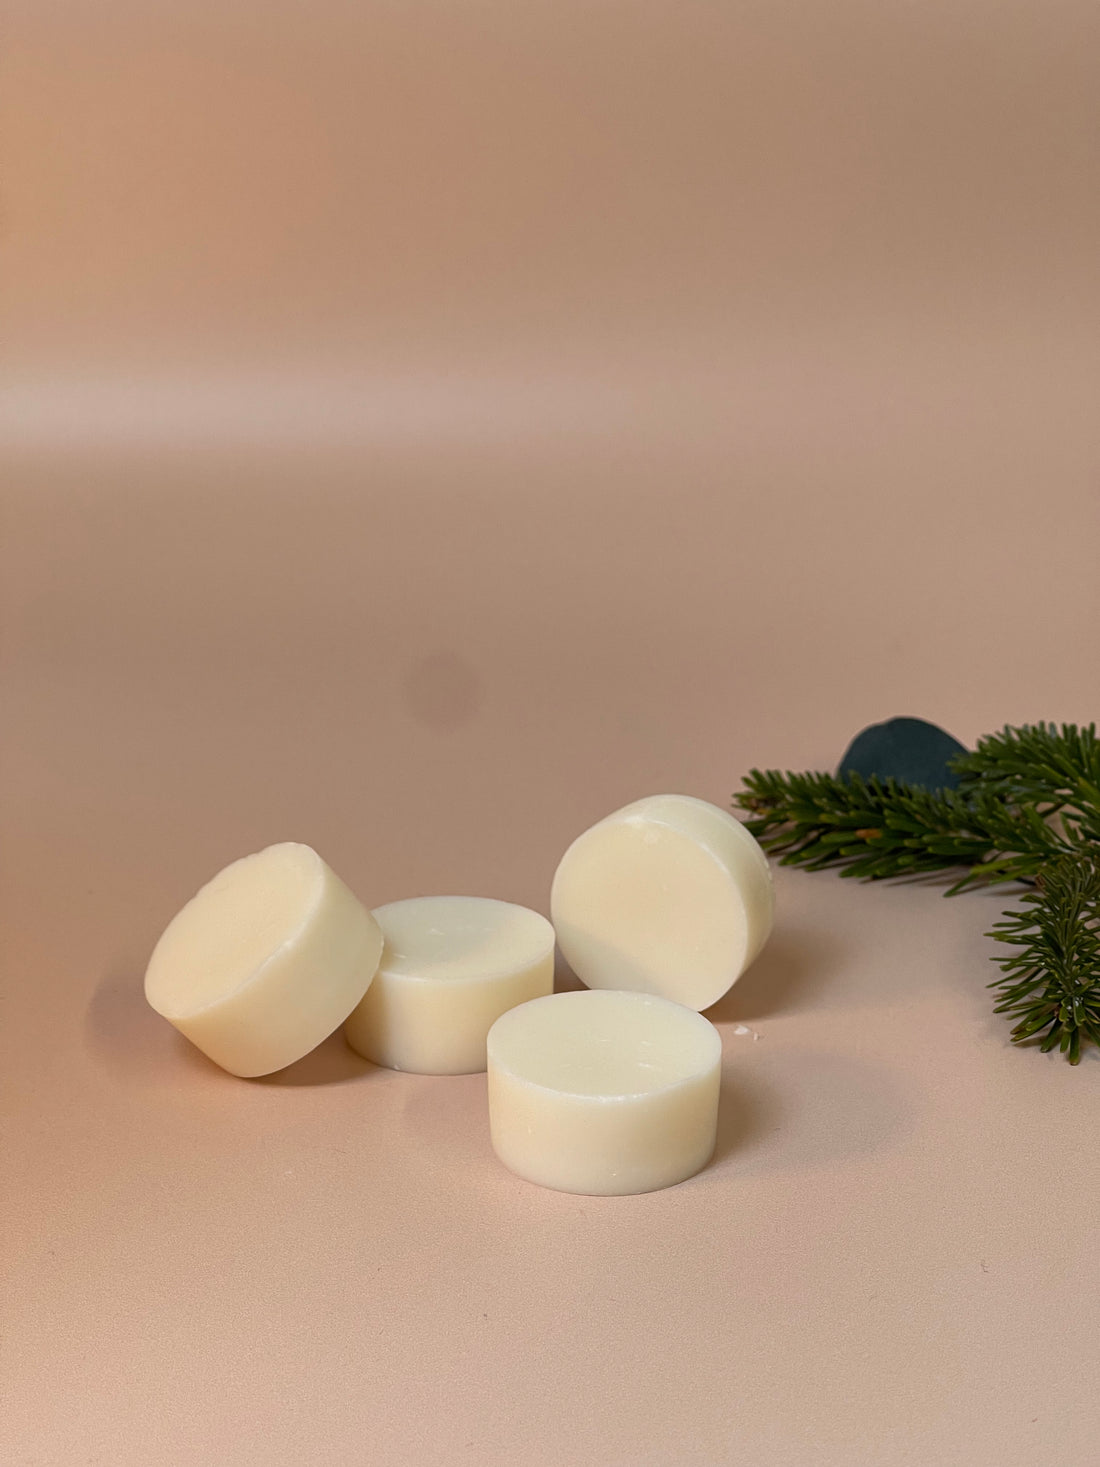 Nordic Forest luxury scented wax melts in gift box, with soy wax and pine and eucalyptus fragrance.